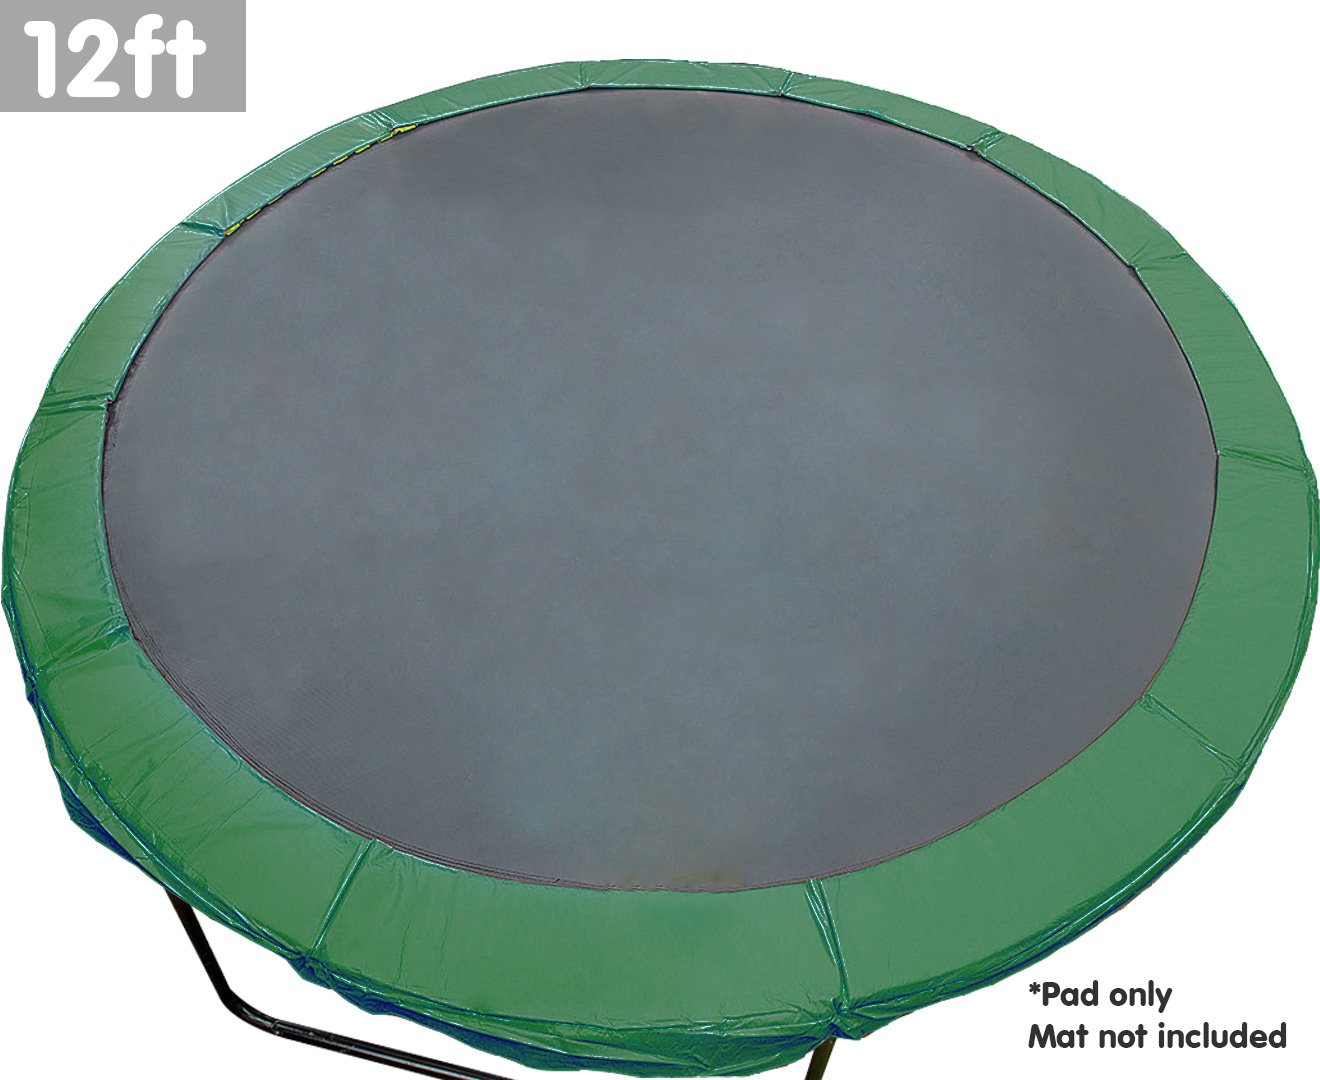 Trampoline 12ft Replacement Reinforced Outdoor Pad Cover - Green 1